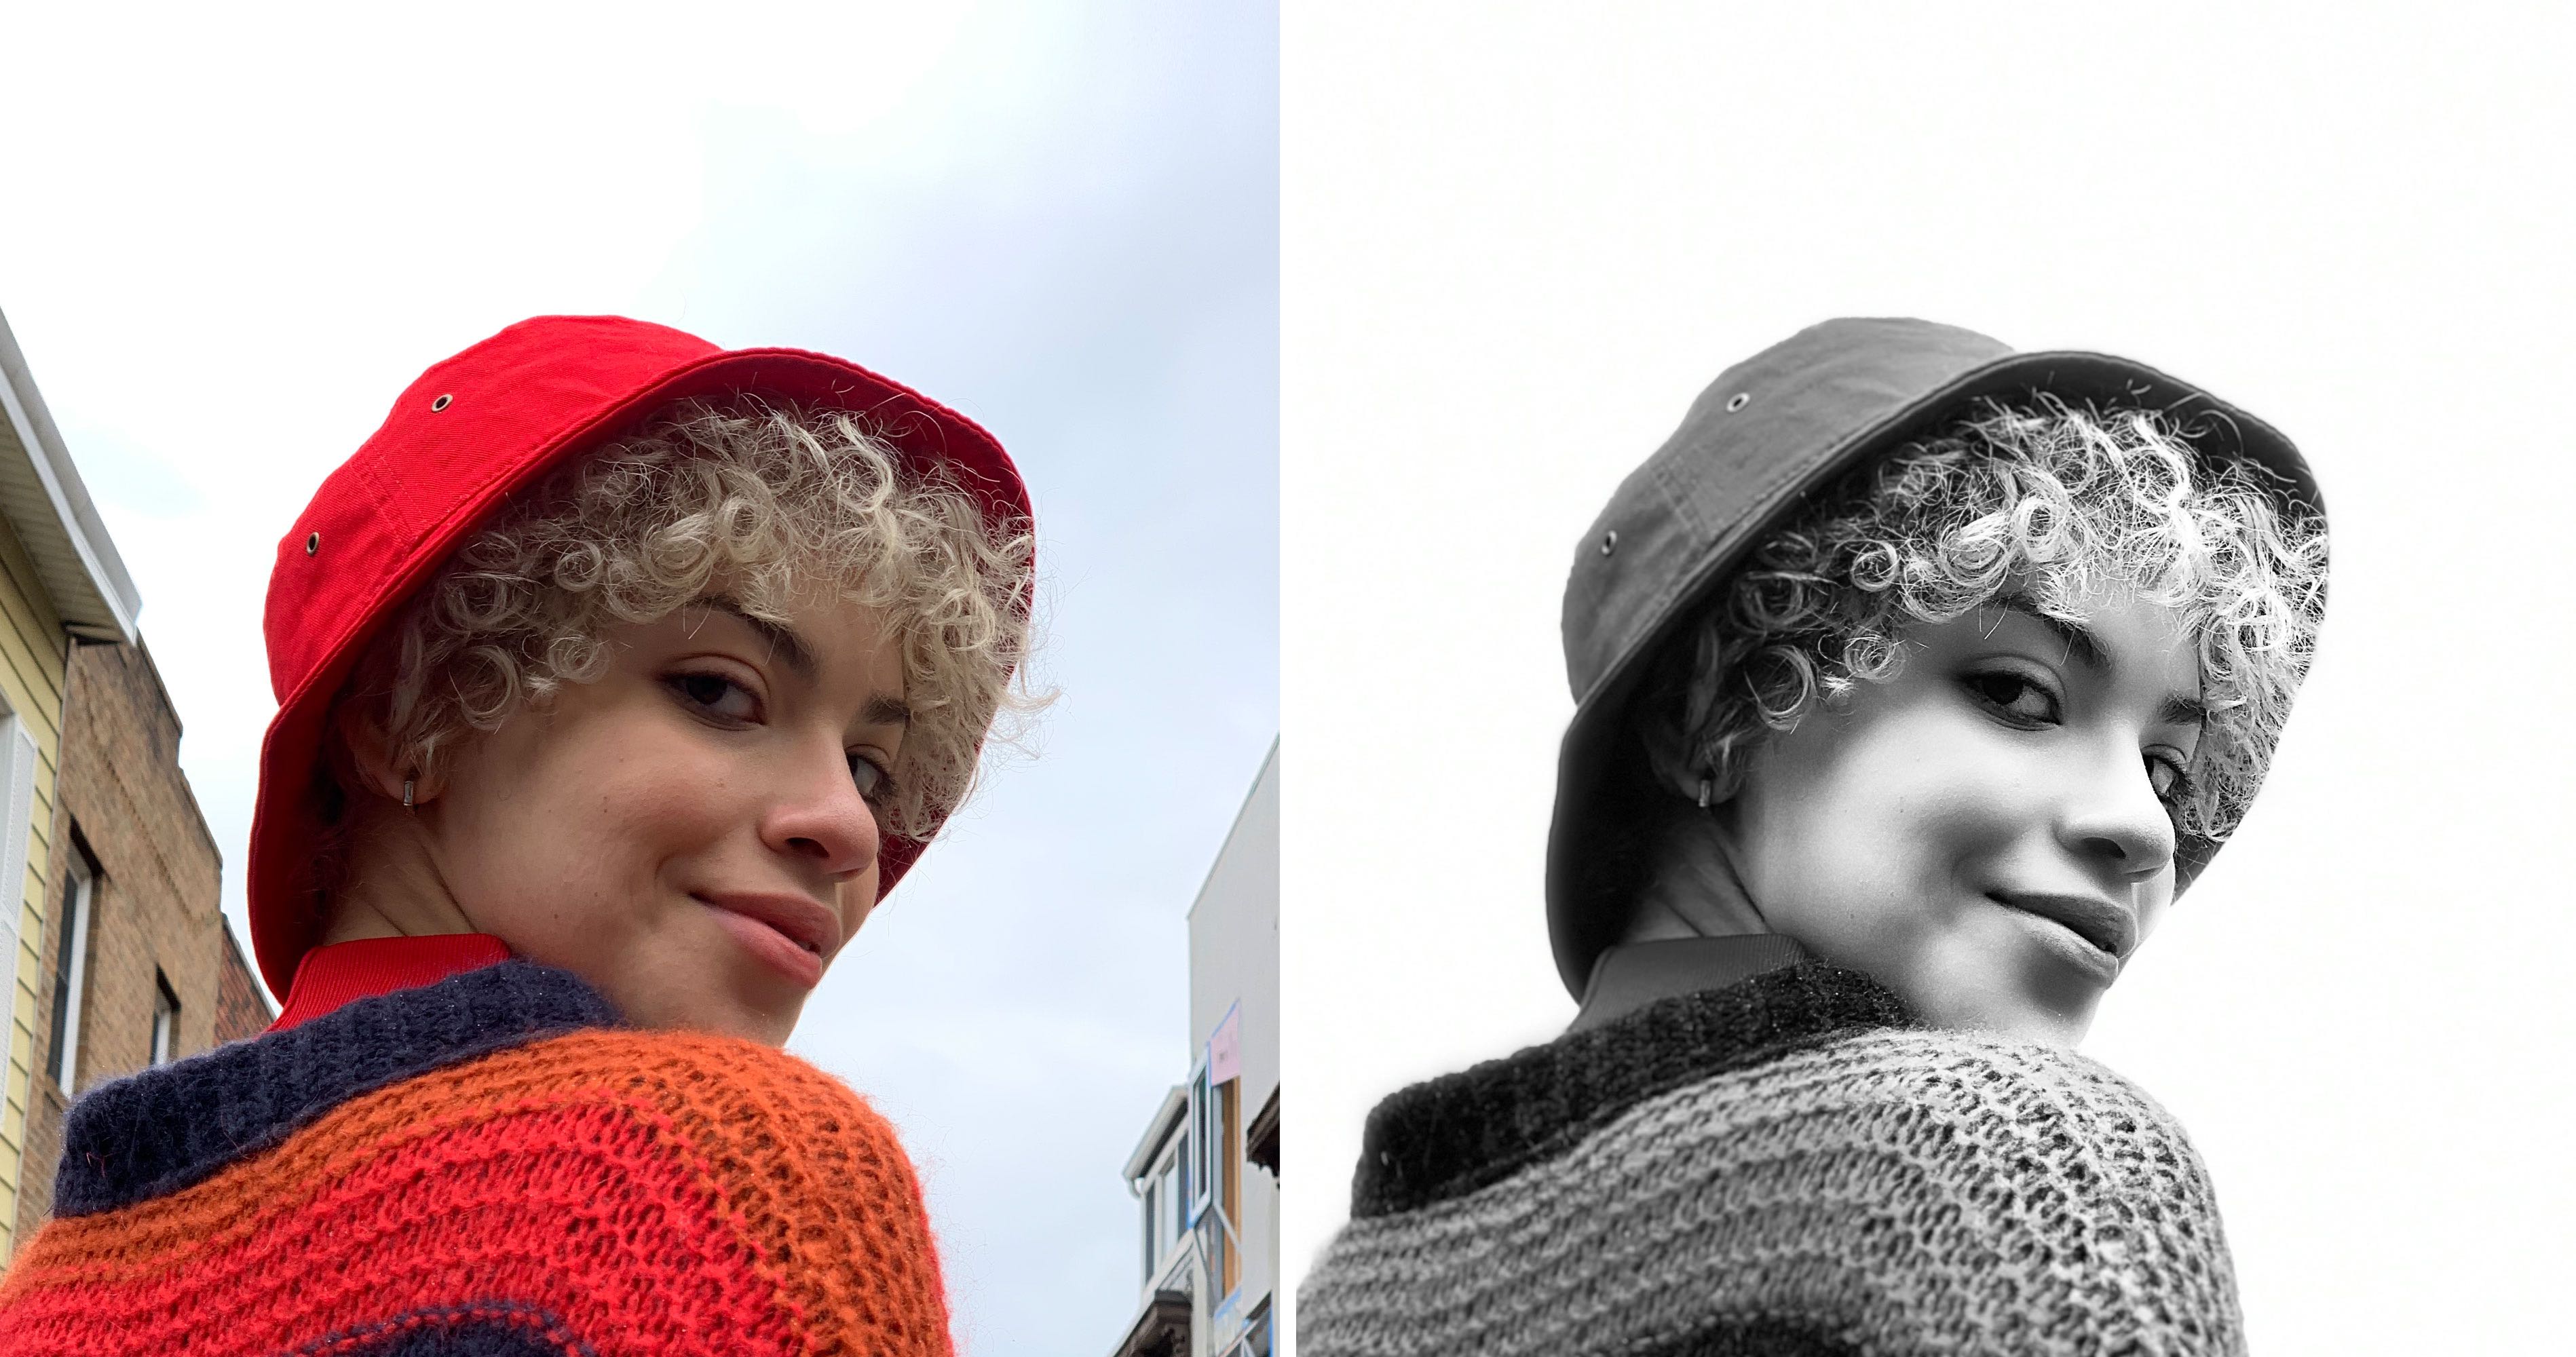 The new High‑Key Mono effect available for Portrait mode photos on iOS 13.